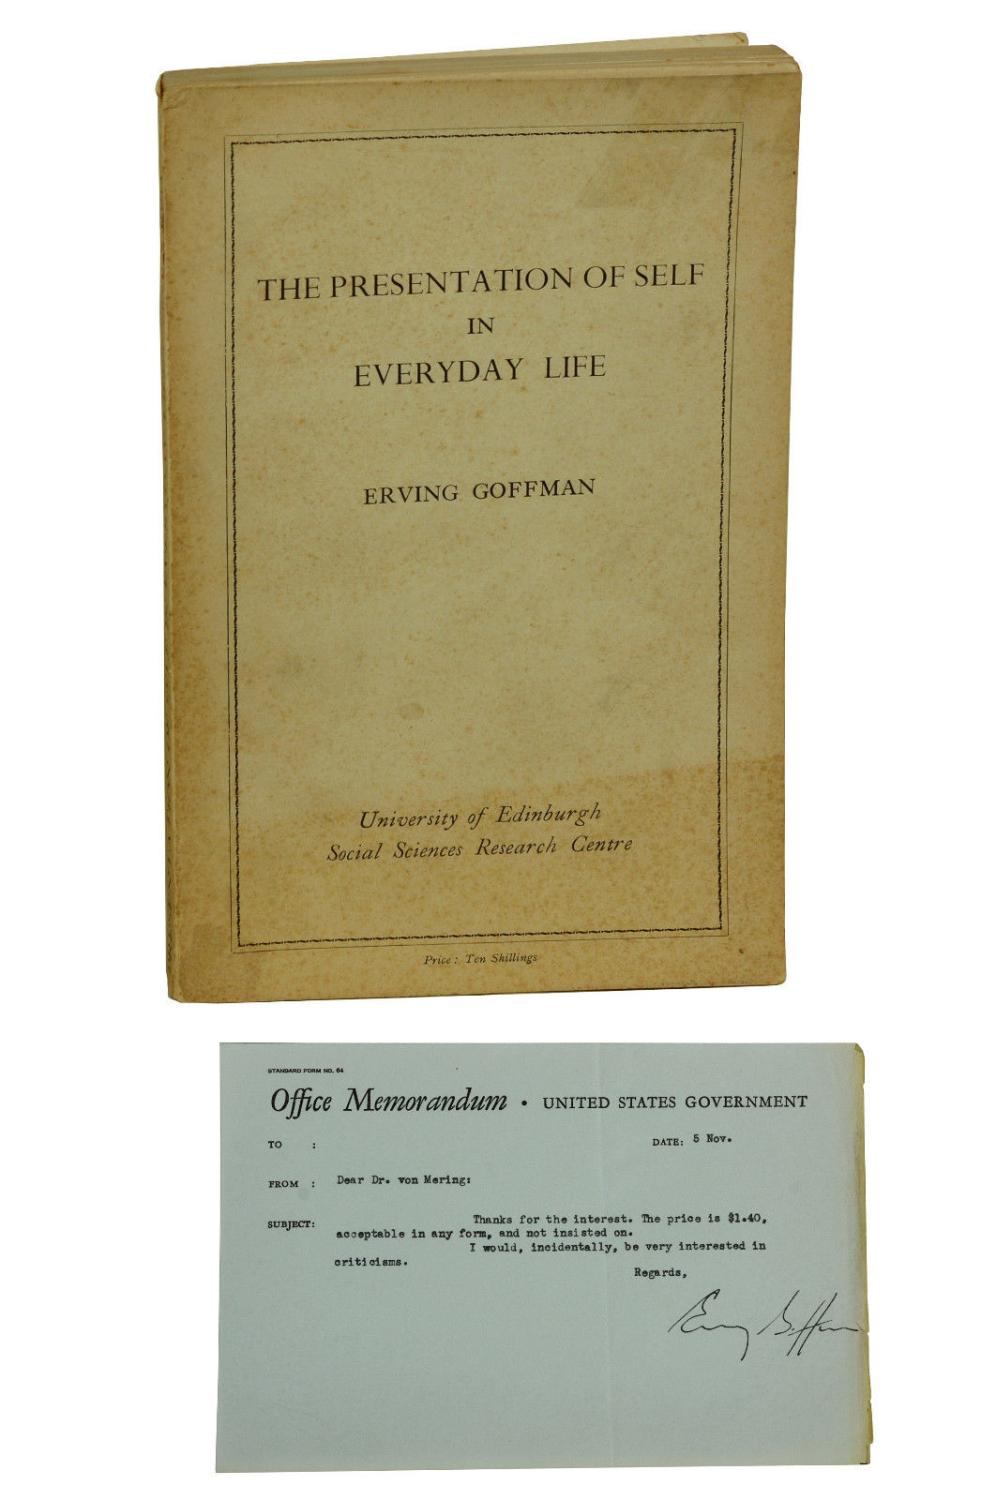 the presentation of self erving goffman